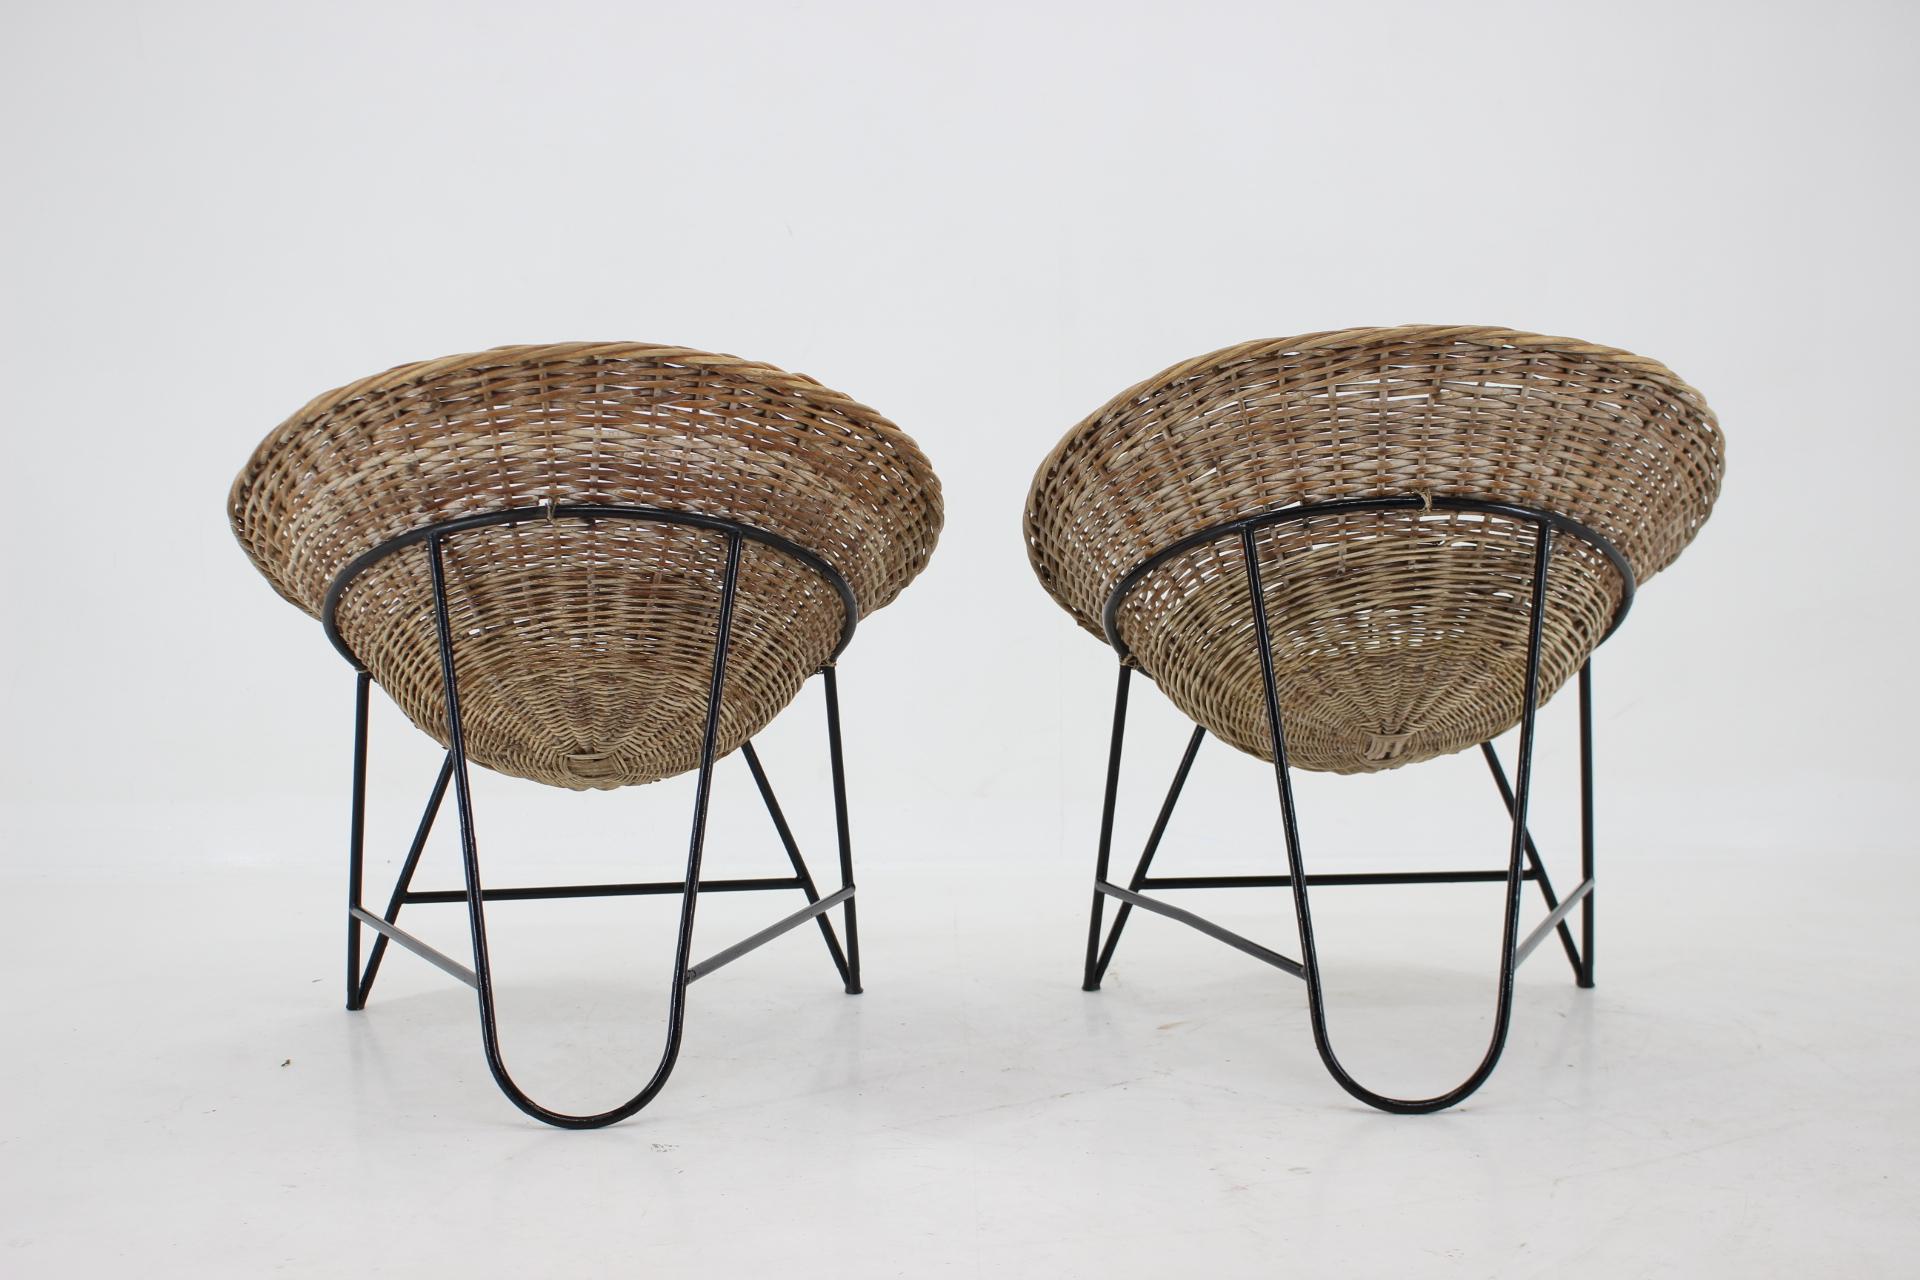 1960s Pair of Rattan Woven Basket Chair with Hairpin Legs In Good Condition For Sale In Praha, CZ